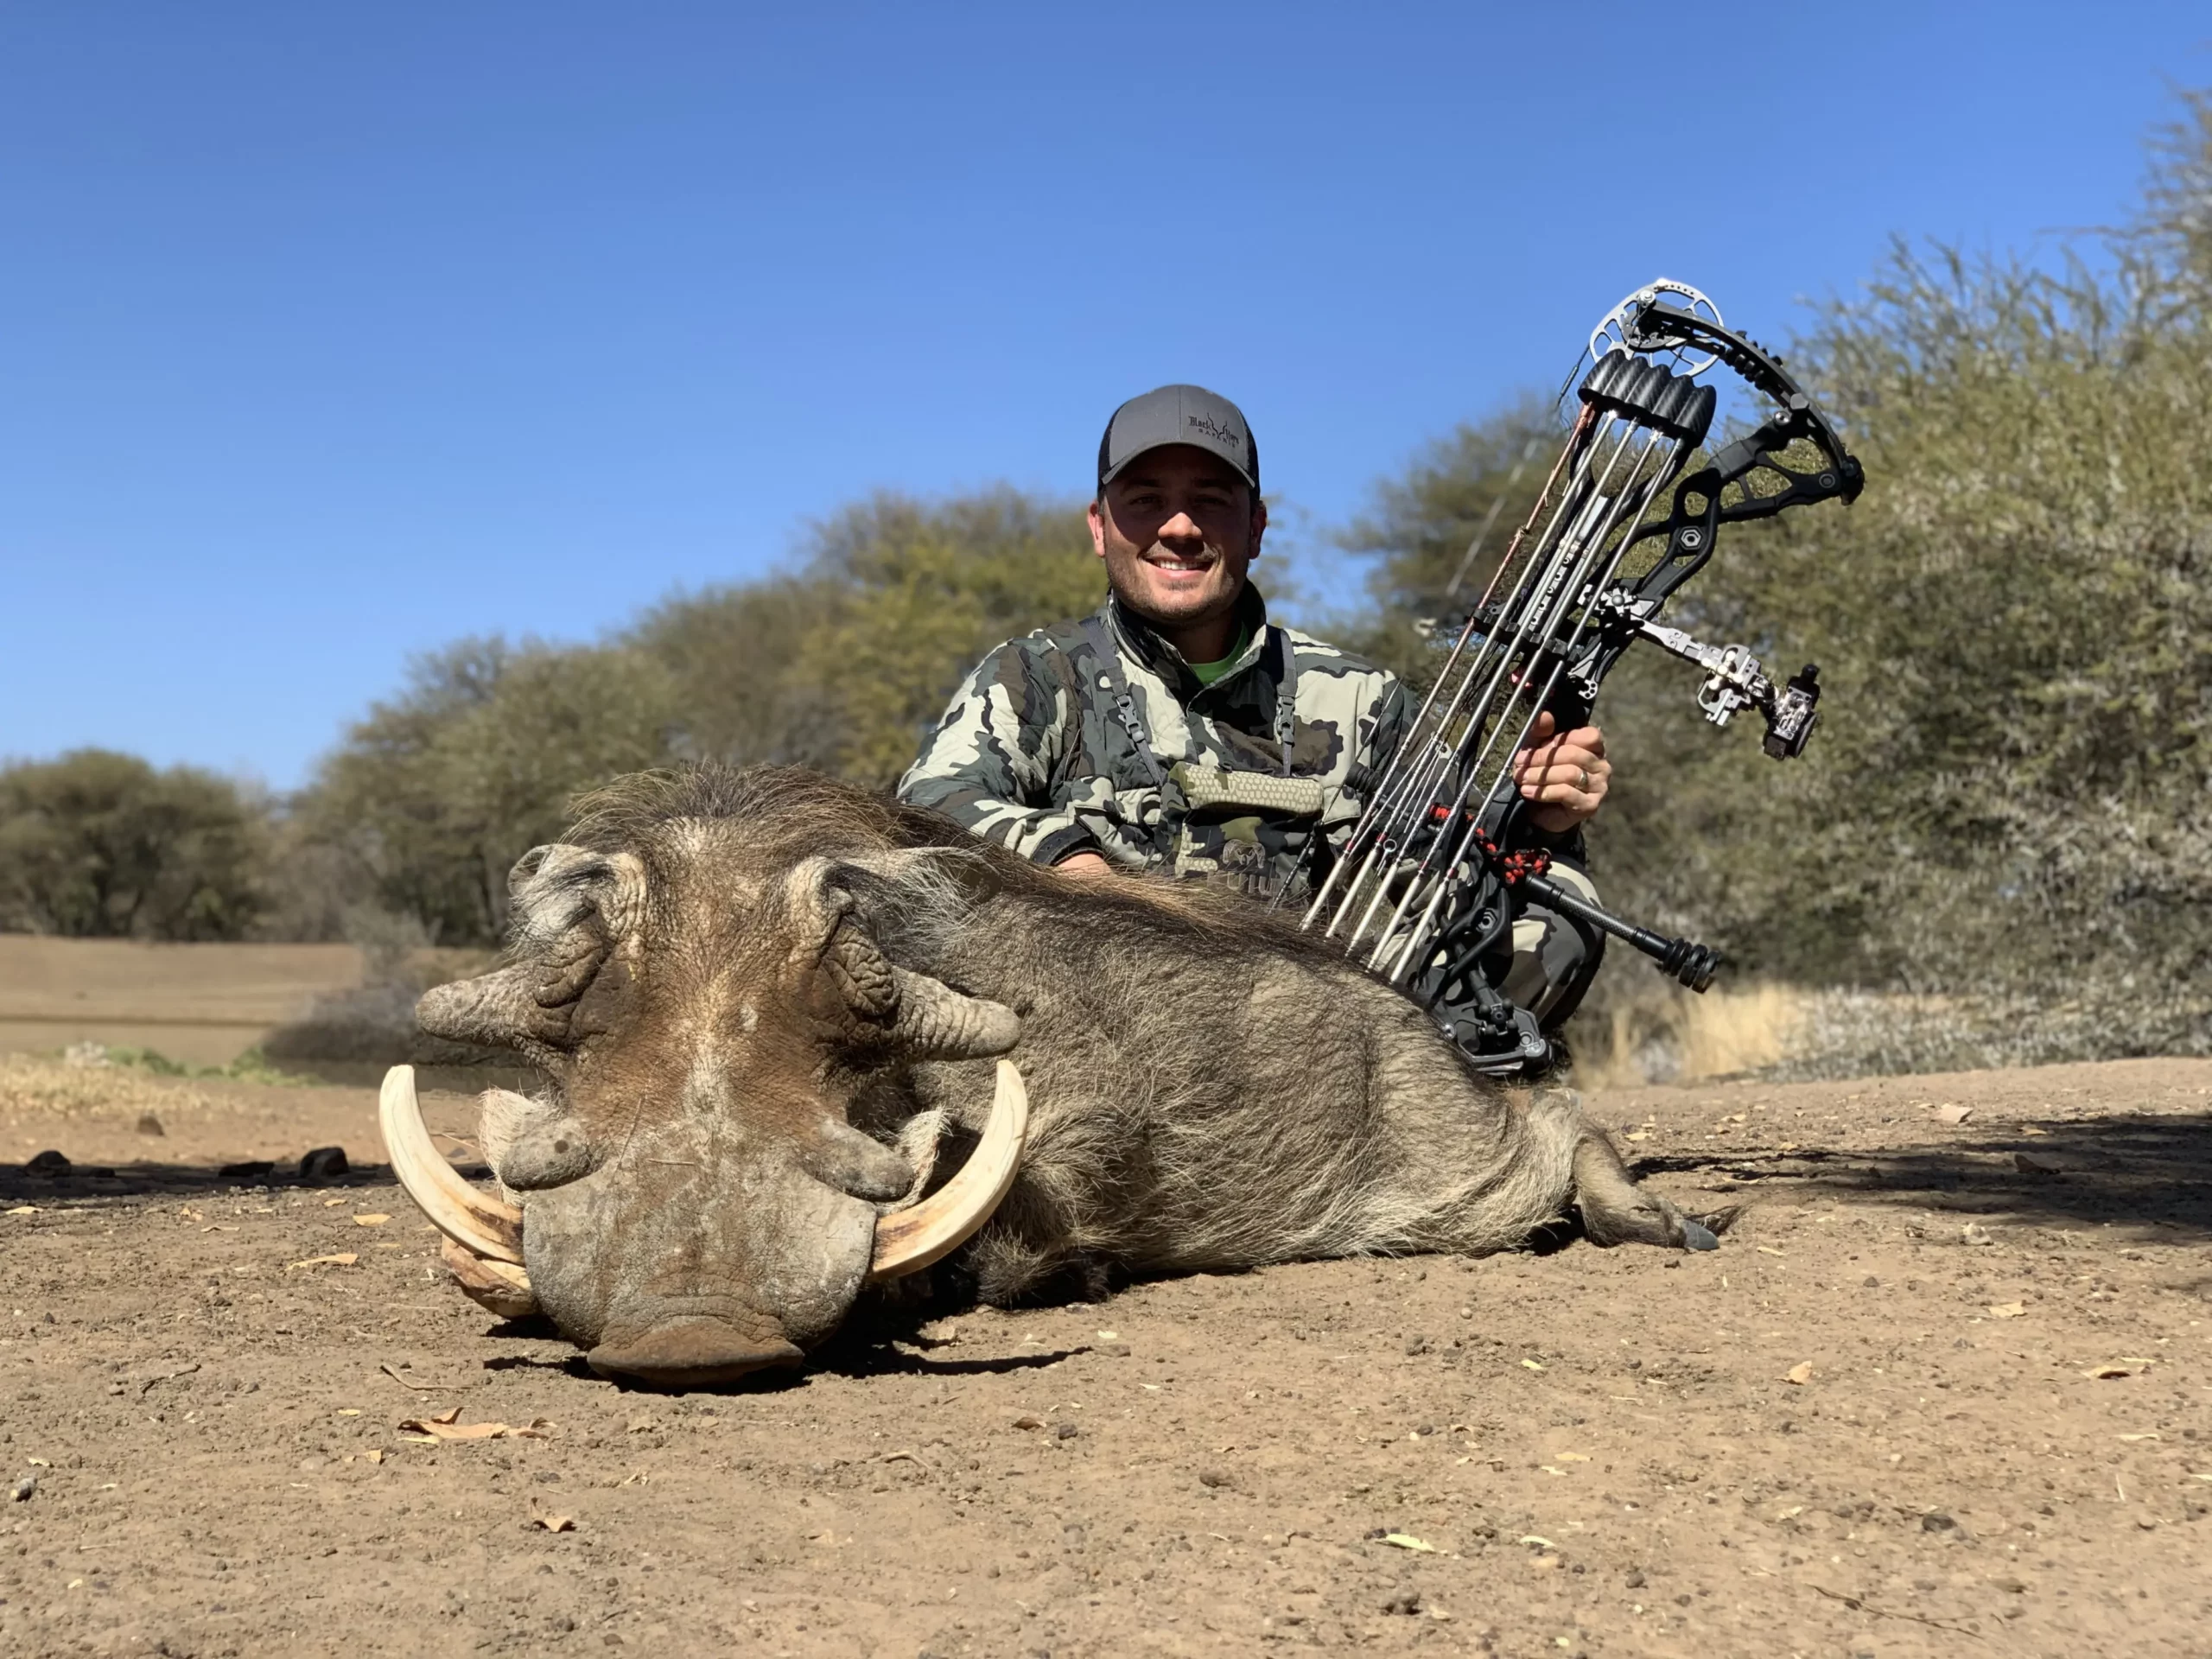 Unique bow hunting safari in South Africa - hunter with Warthog trophy